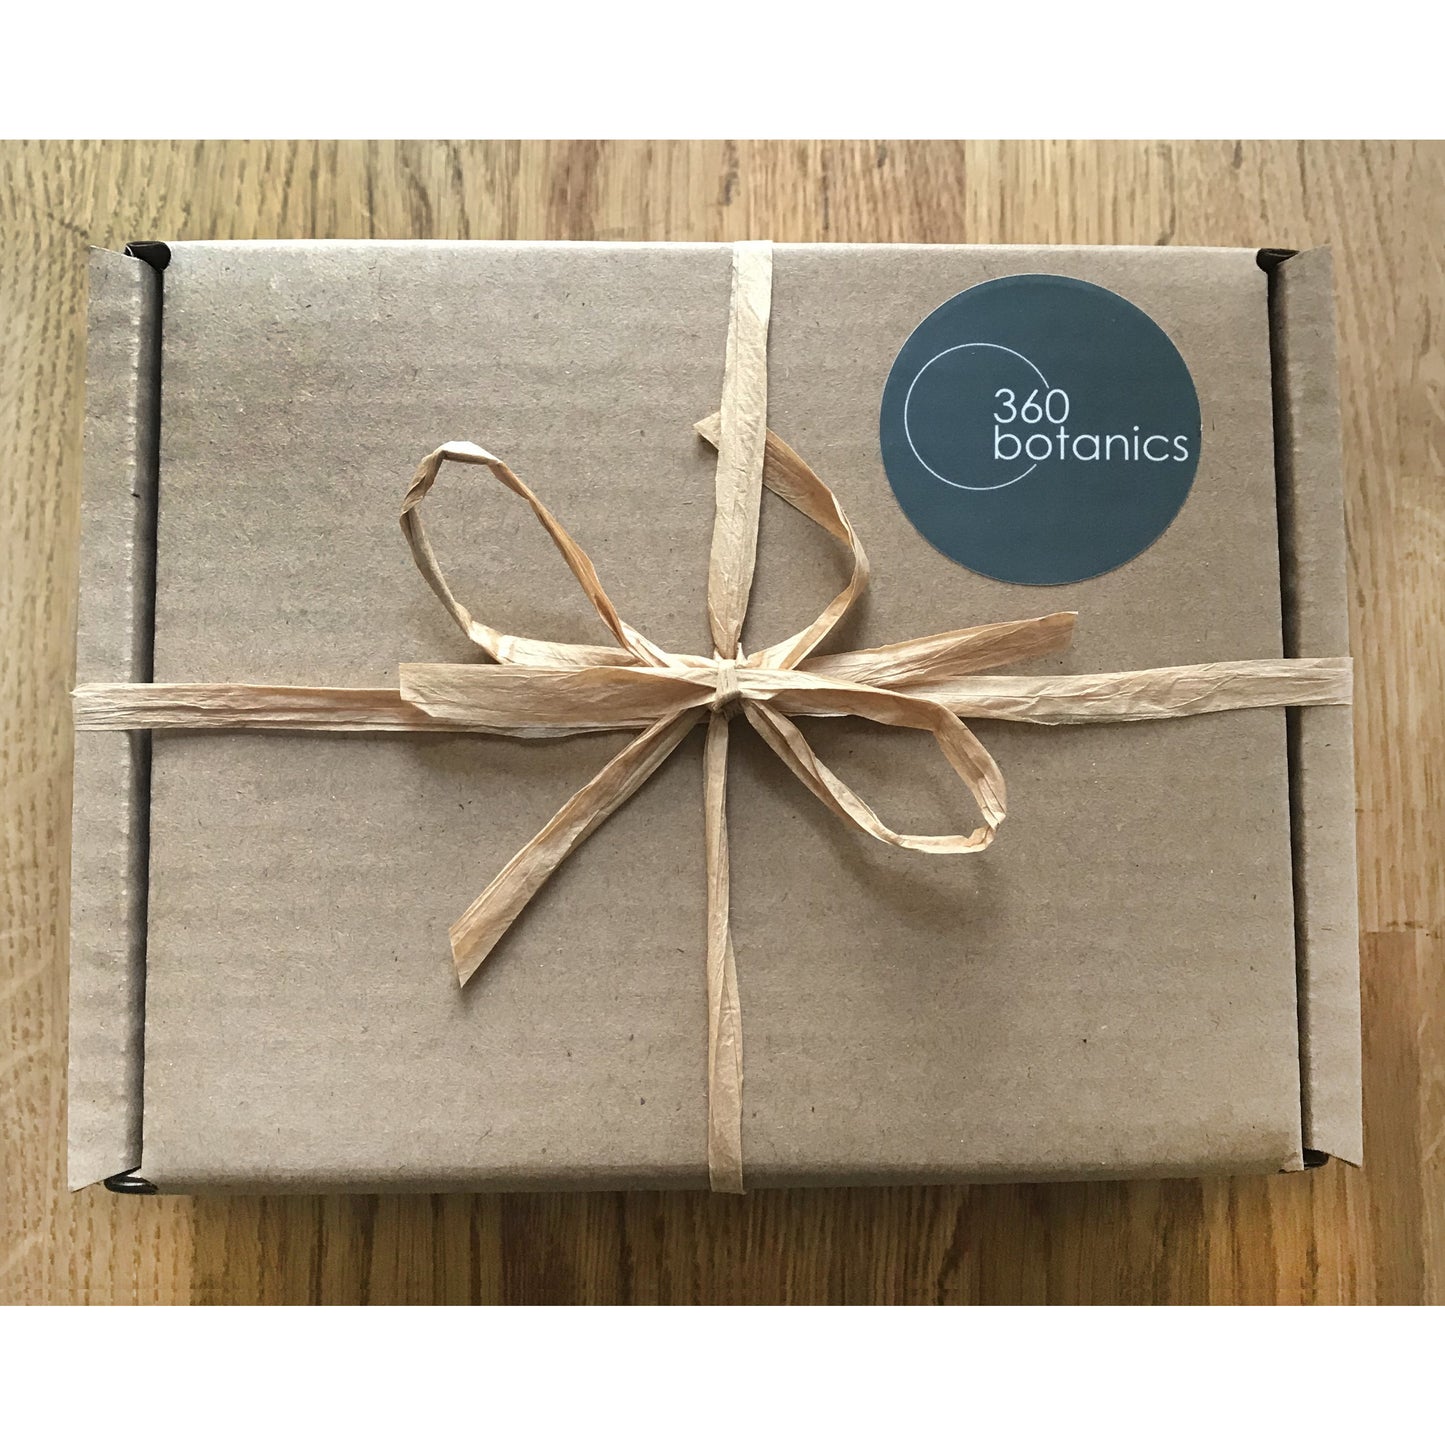 Eco-friendly packaging from 360 Botanics featuring a brown kraft paper box tied with a natural raffia ribbon. The company's logo is prominently displayed on a circular, teal sticker on the top of the box, suggesting a thoughtful and sustainable product presentation